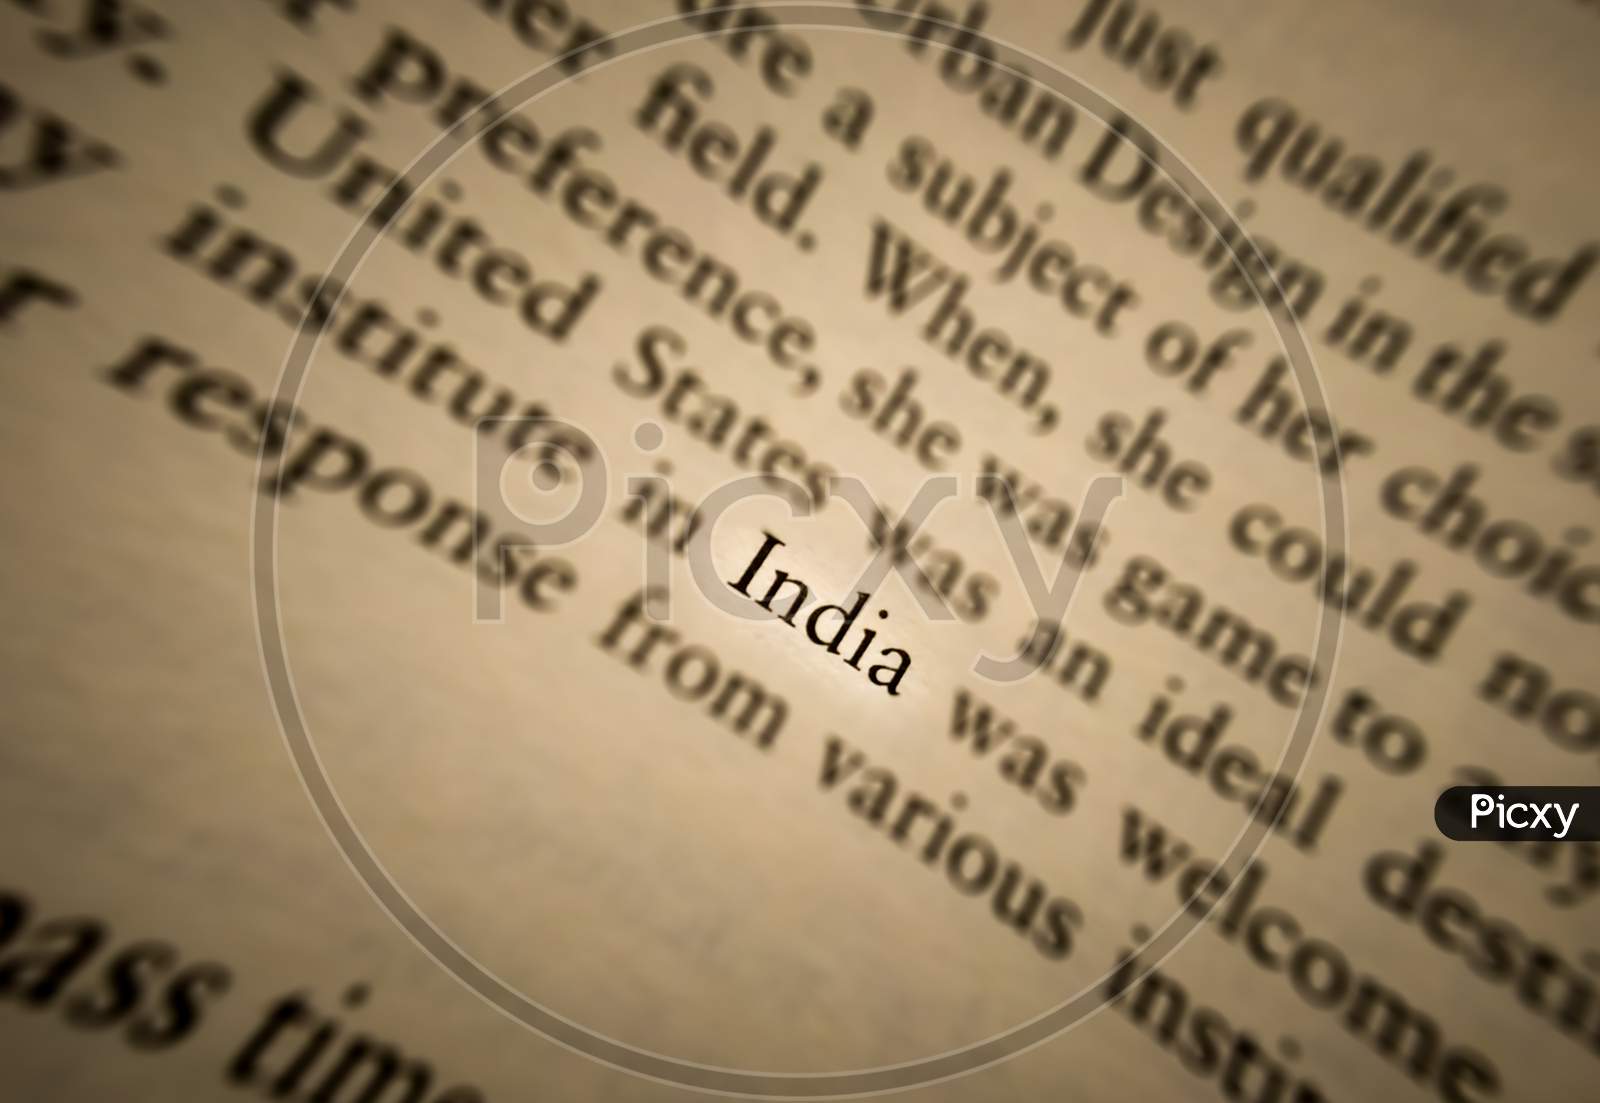 India Word Highlighted And Focused In An Old Book.